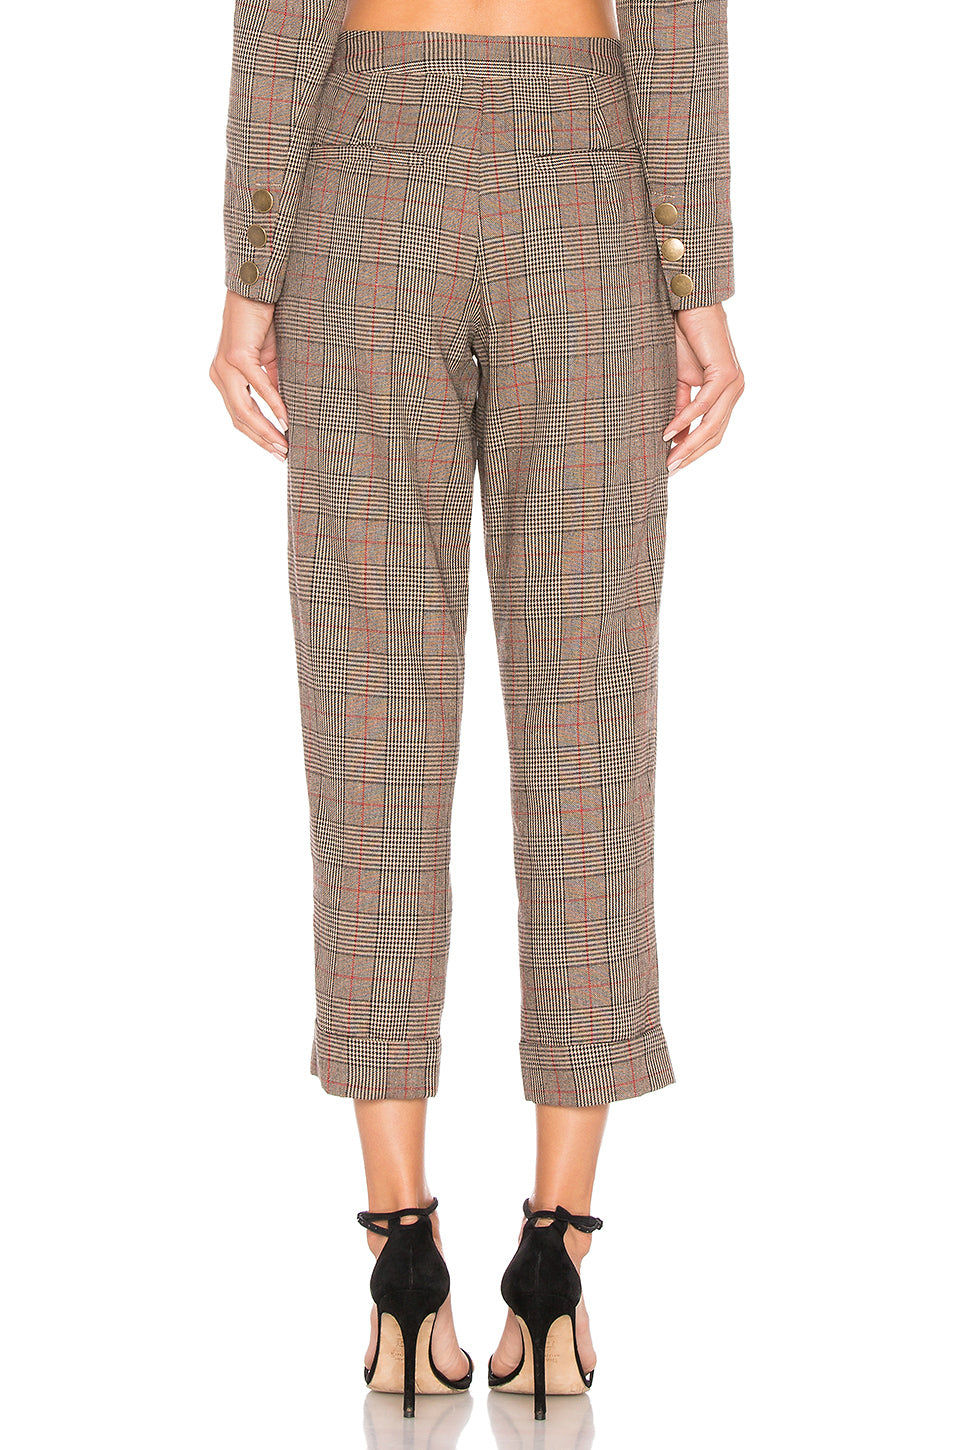 0 in CLASSIC BROWN PLAID